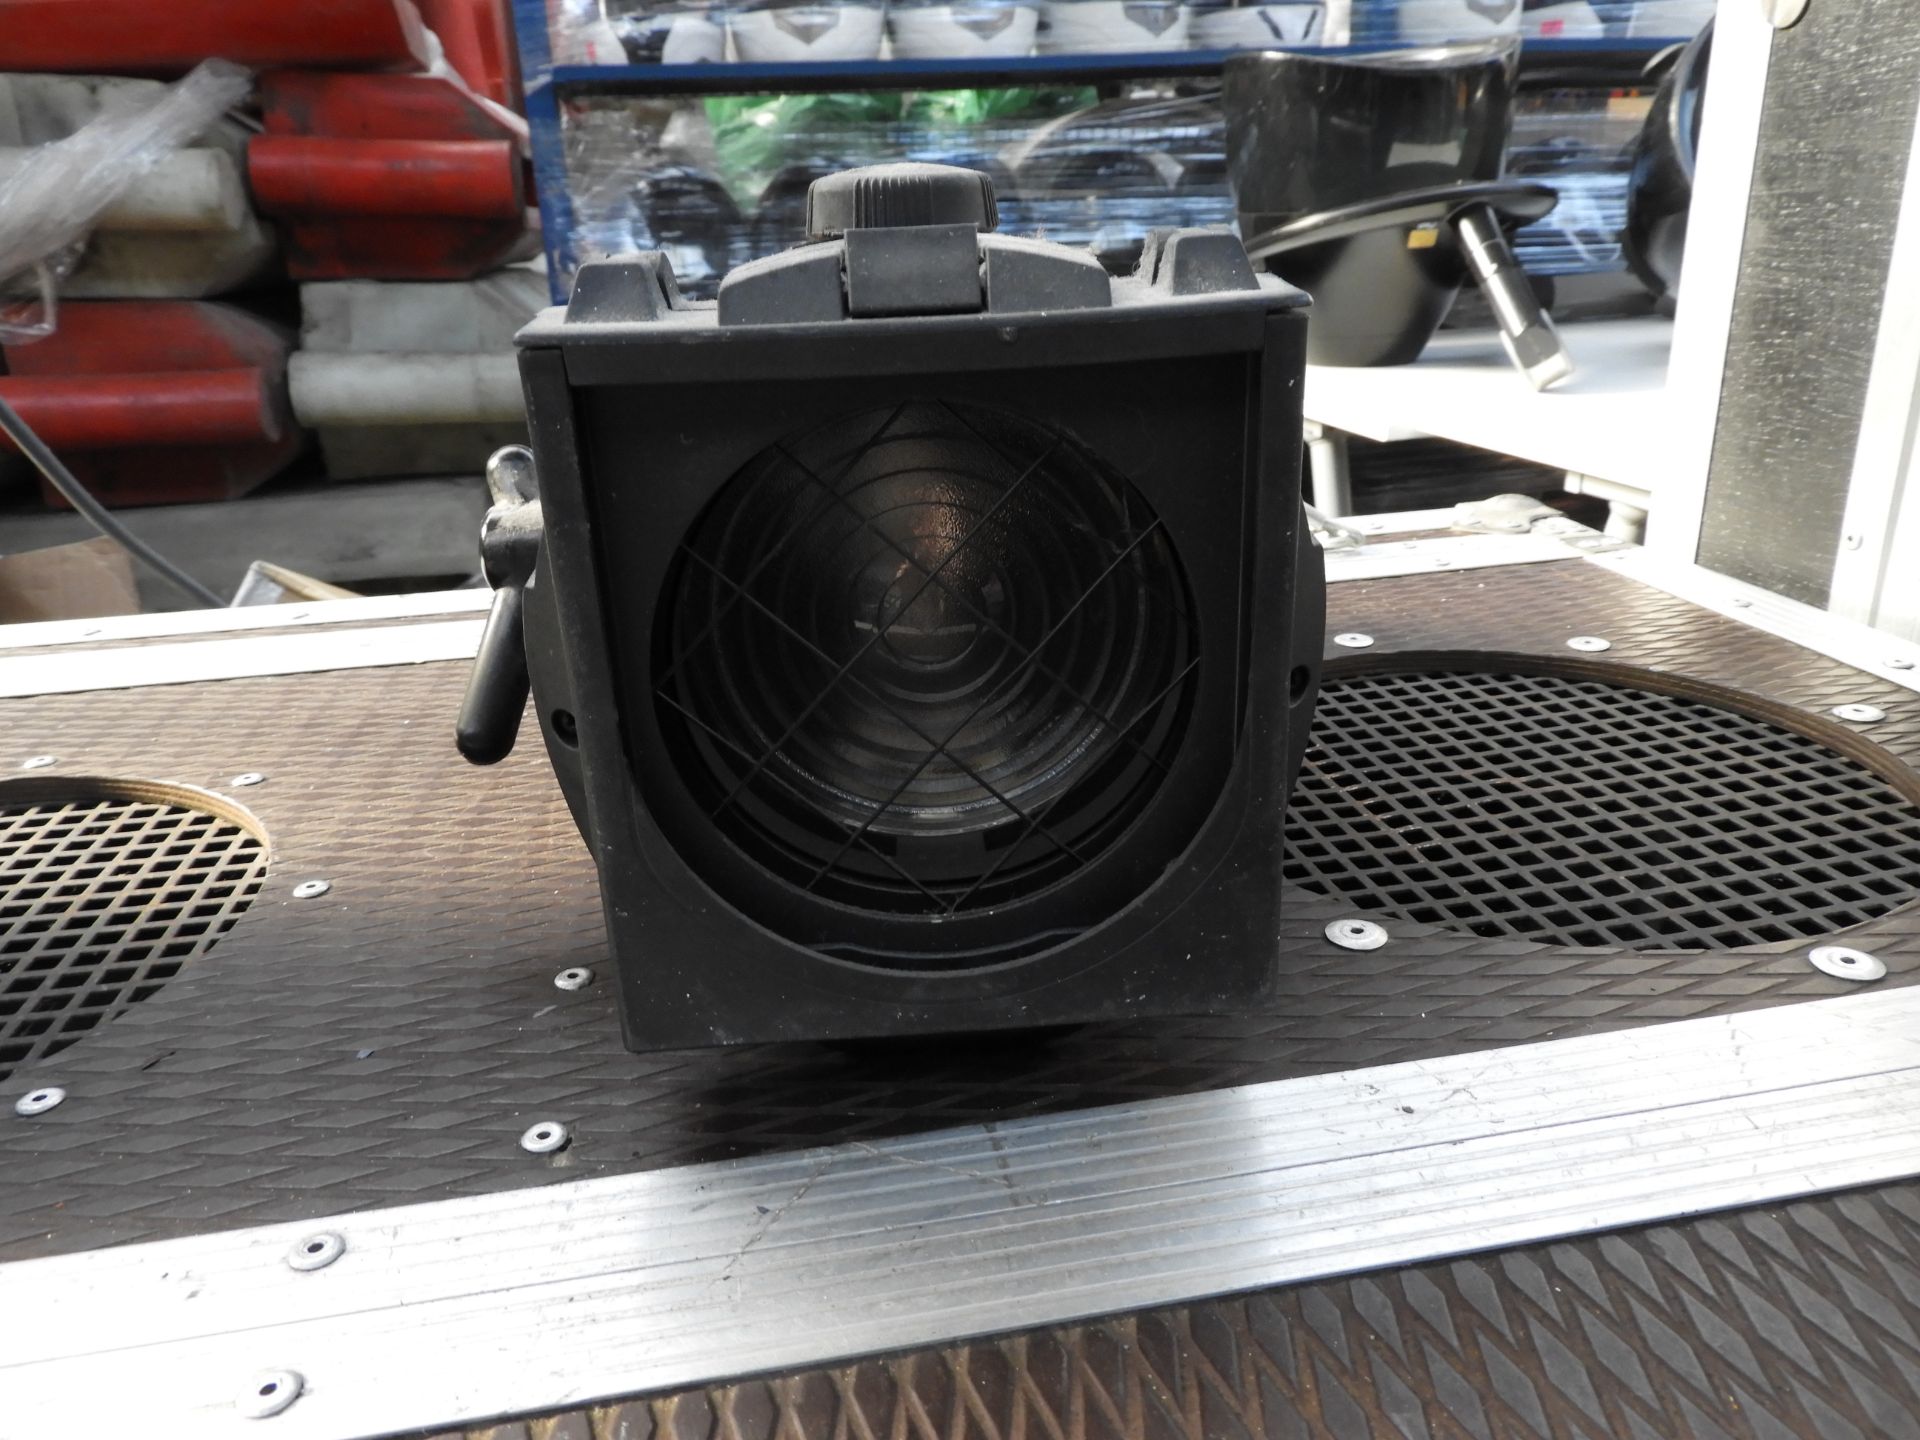 selecon m2 fresnel 650w g clamp safety - Image 3 of 3